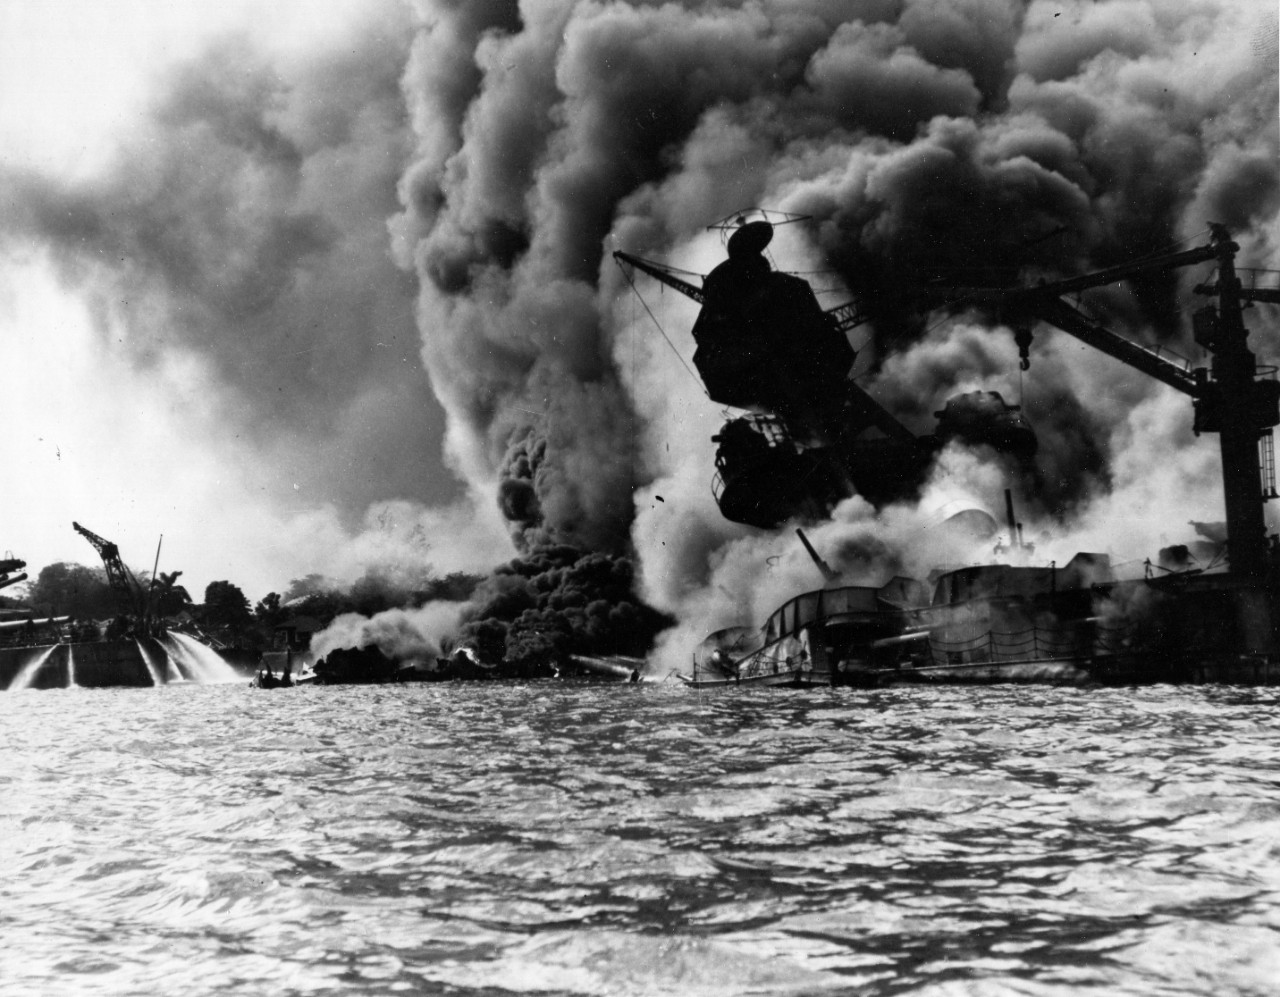 USS Arizona sinking and burning furiously on December 7, 1941. Her forward magazines exploded when she was hit by a Japanese bomb. At left, men on the stern of USS Tennessee are using fire hoses on the water to force burning oil away from their ship. (National Archives)